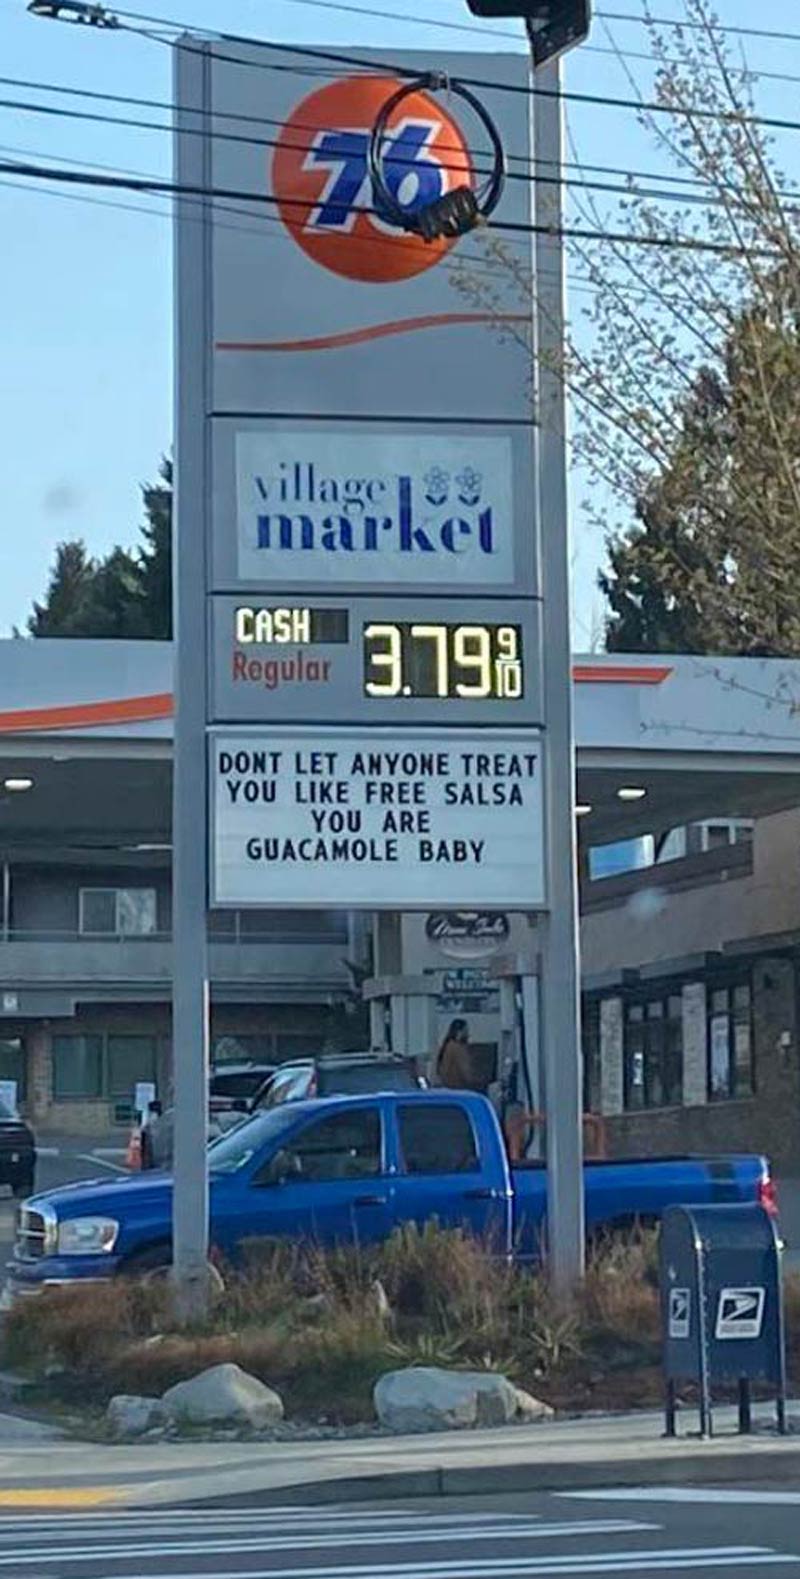 My motivation for today came from a gas station sign and I'm not mad about it